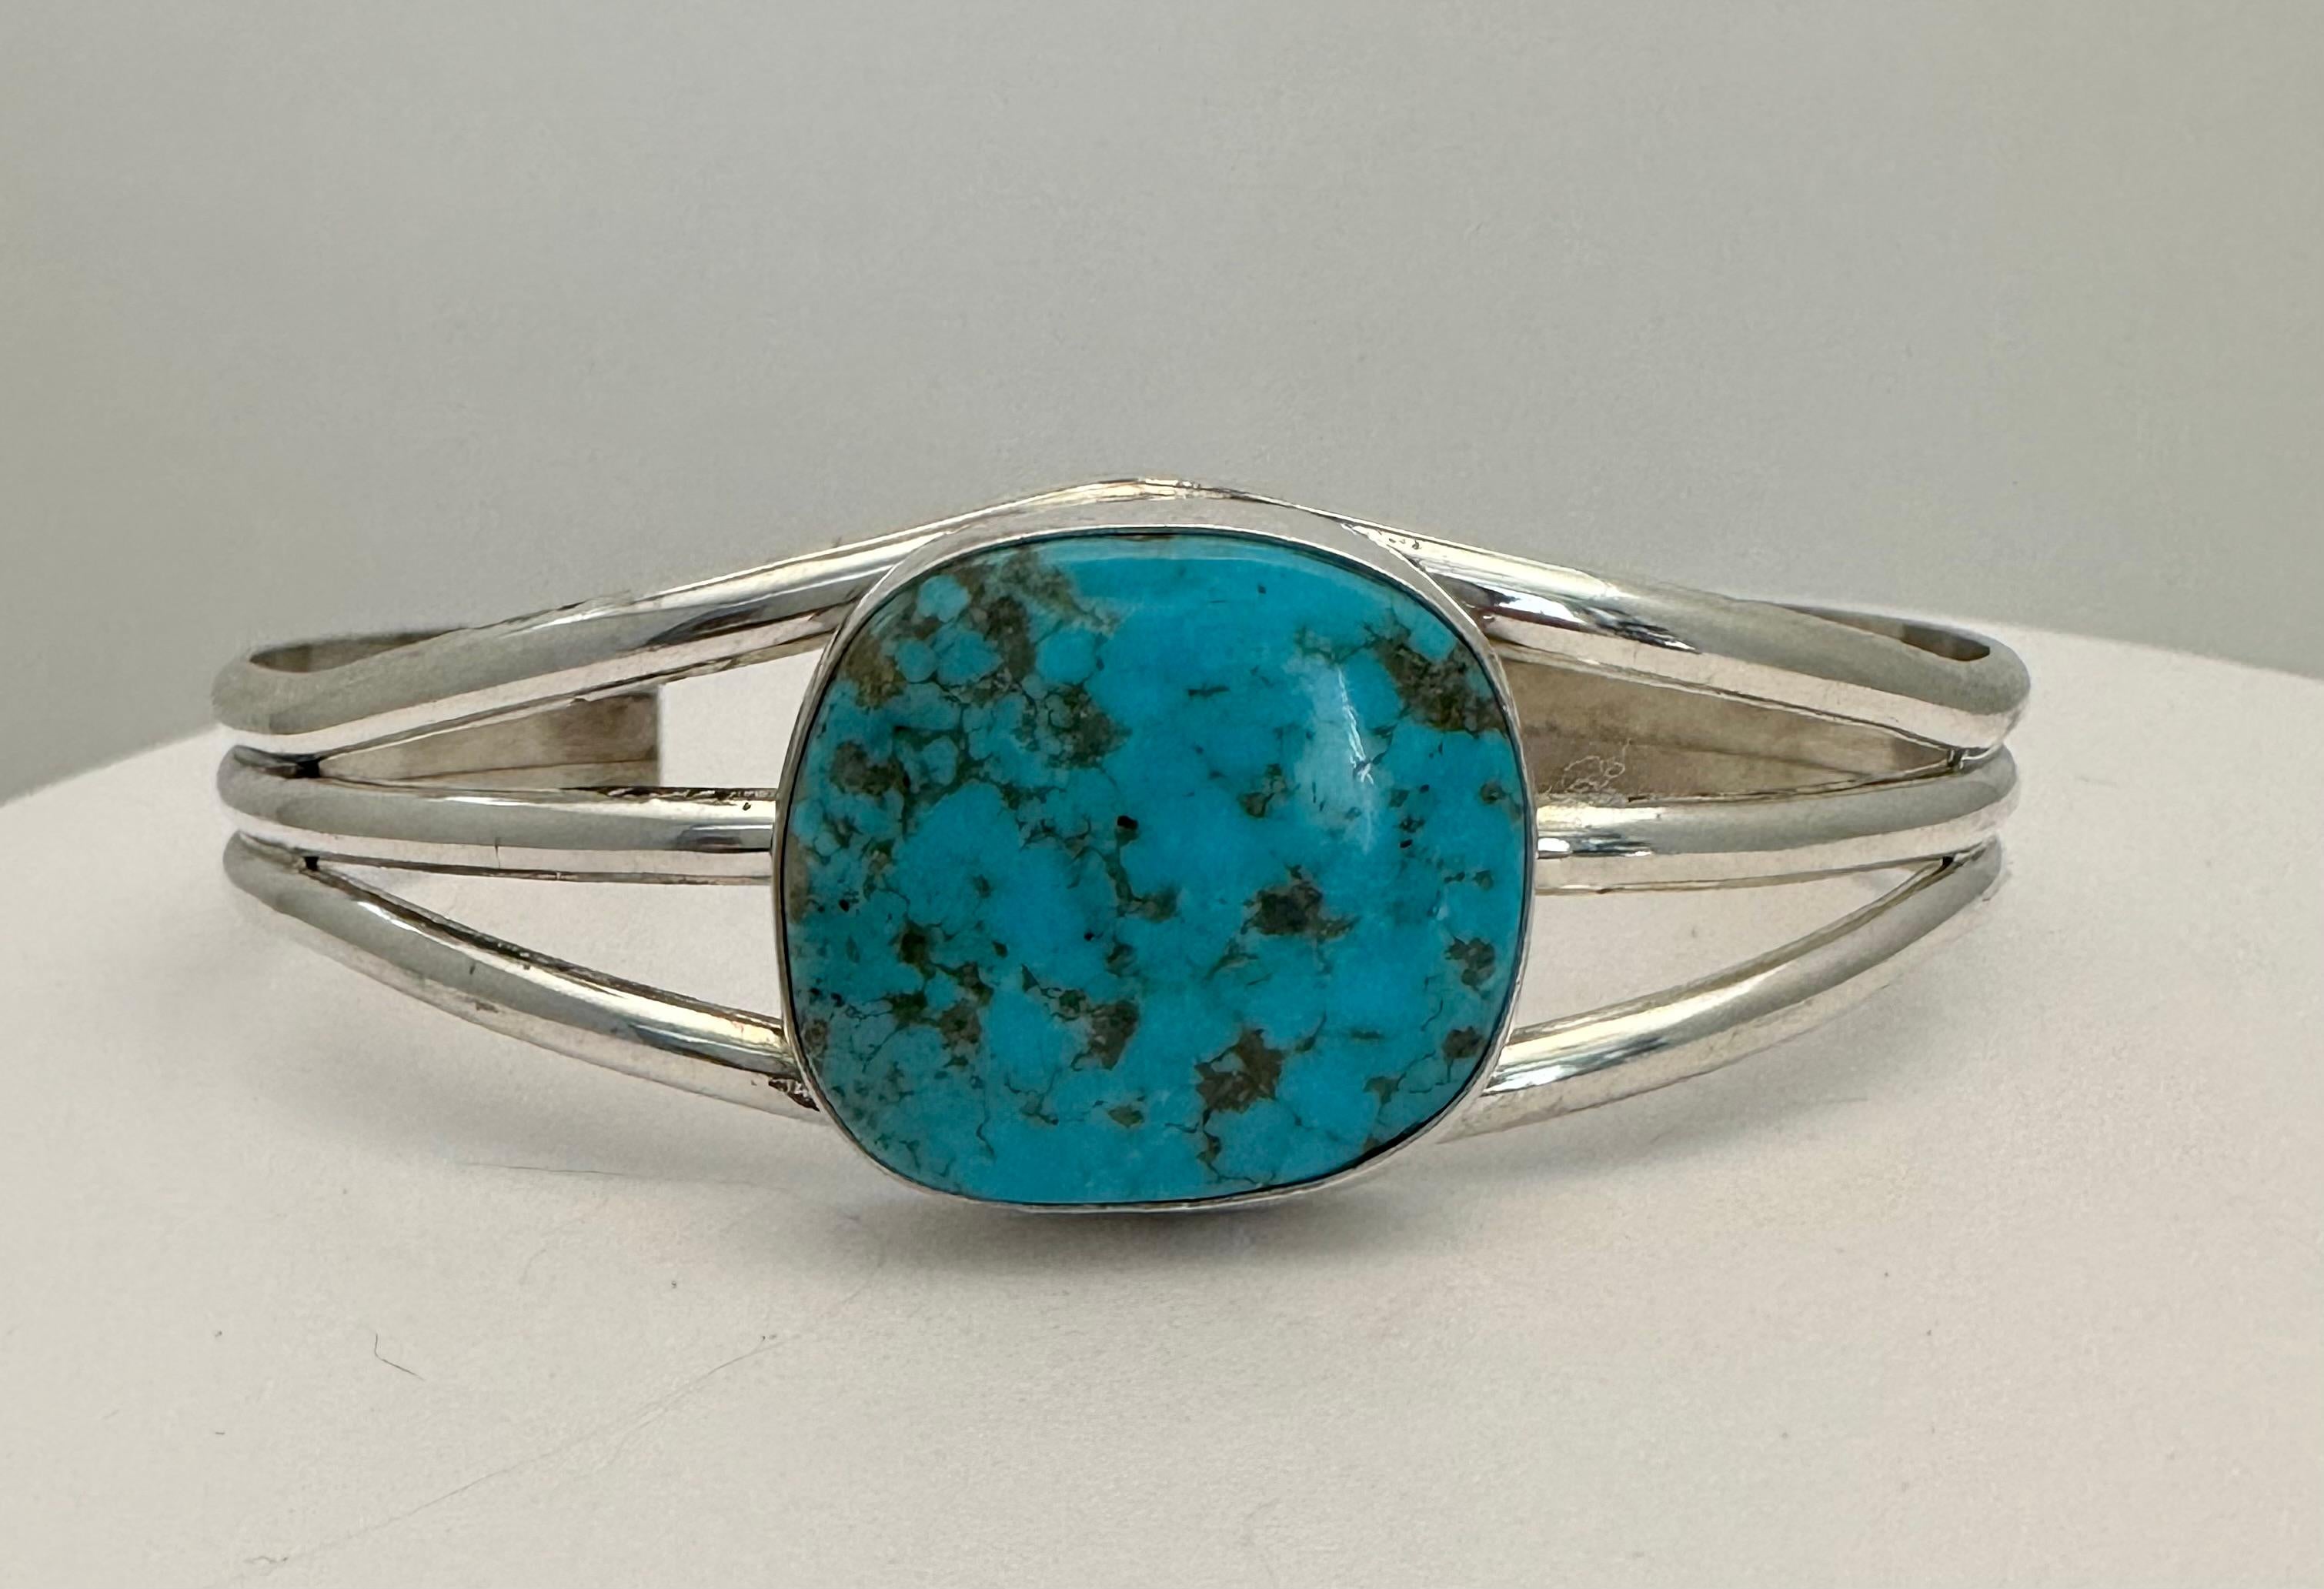 Cabochon Sterling Silver Birdseye Turquoise Cuff Bracelet by Navajo Artist Dave Skeets For Sale